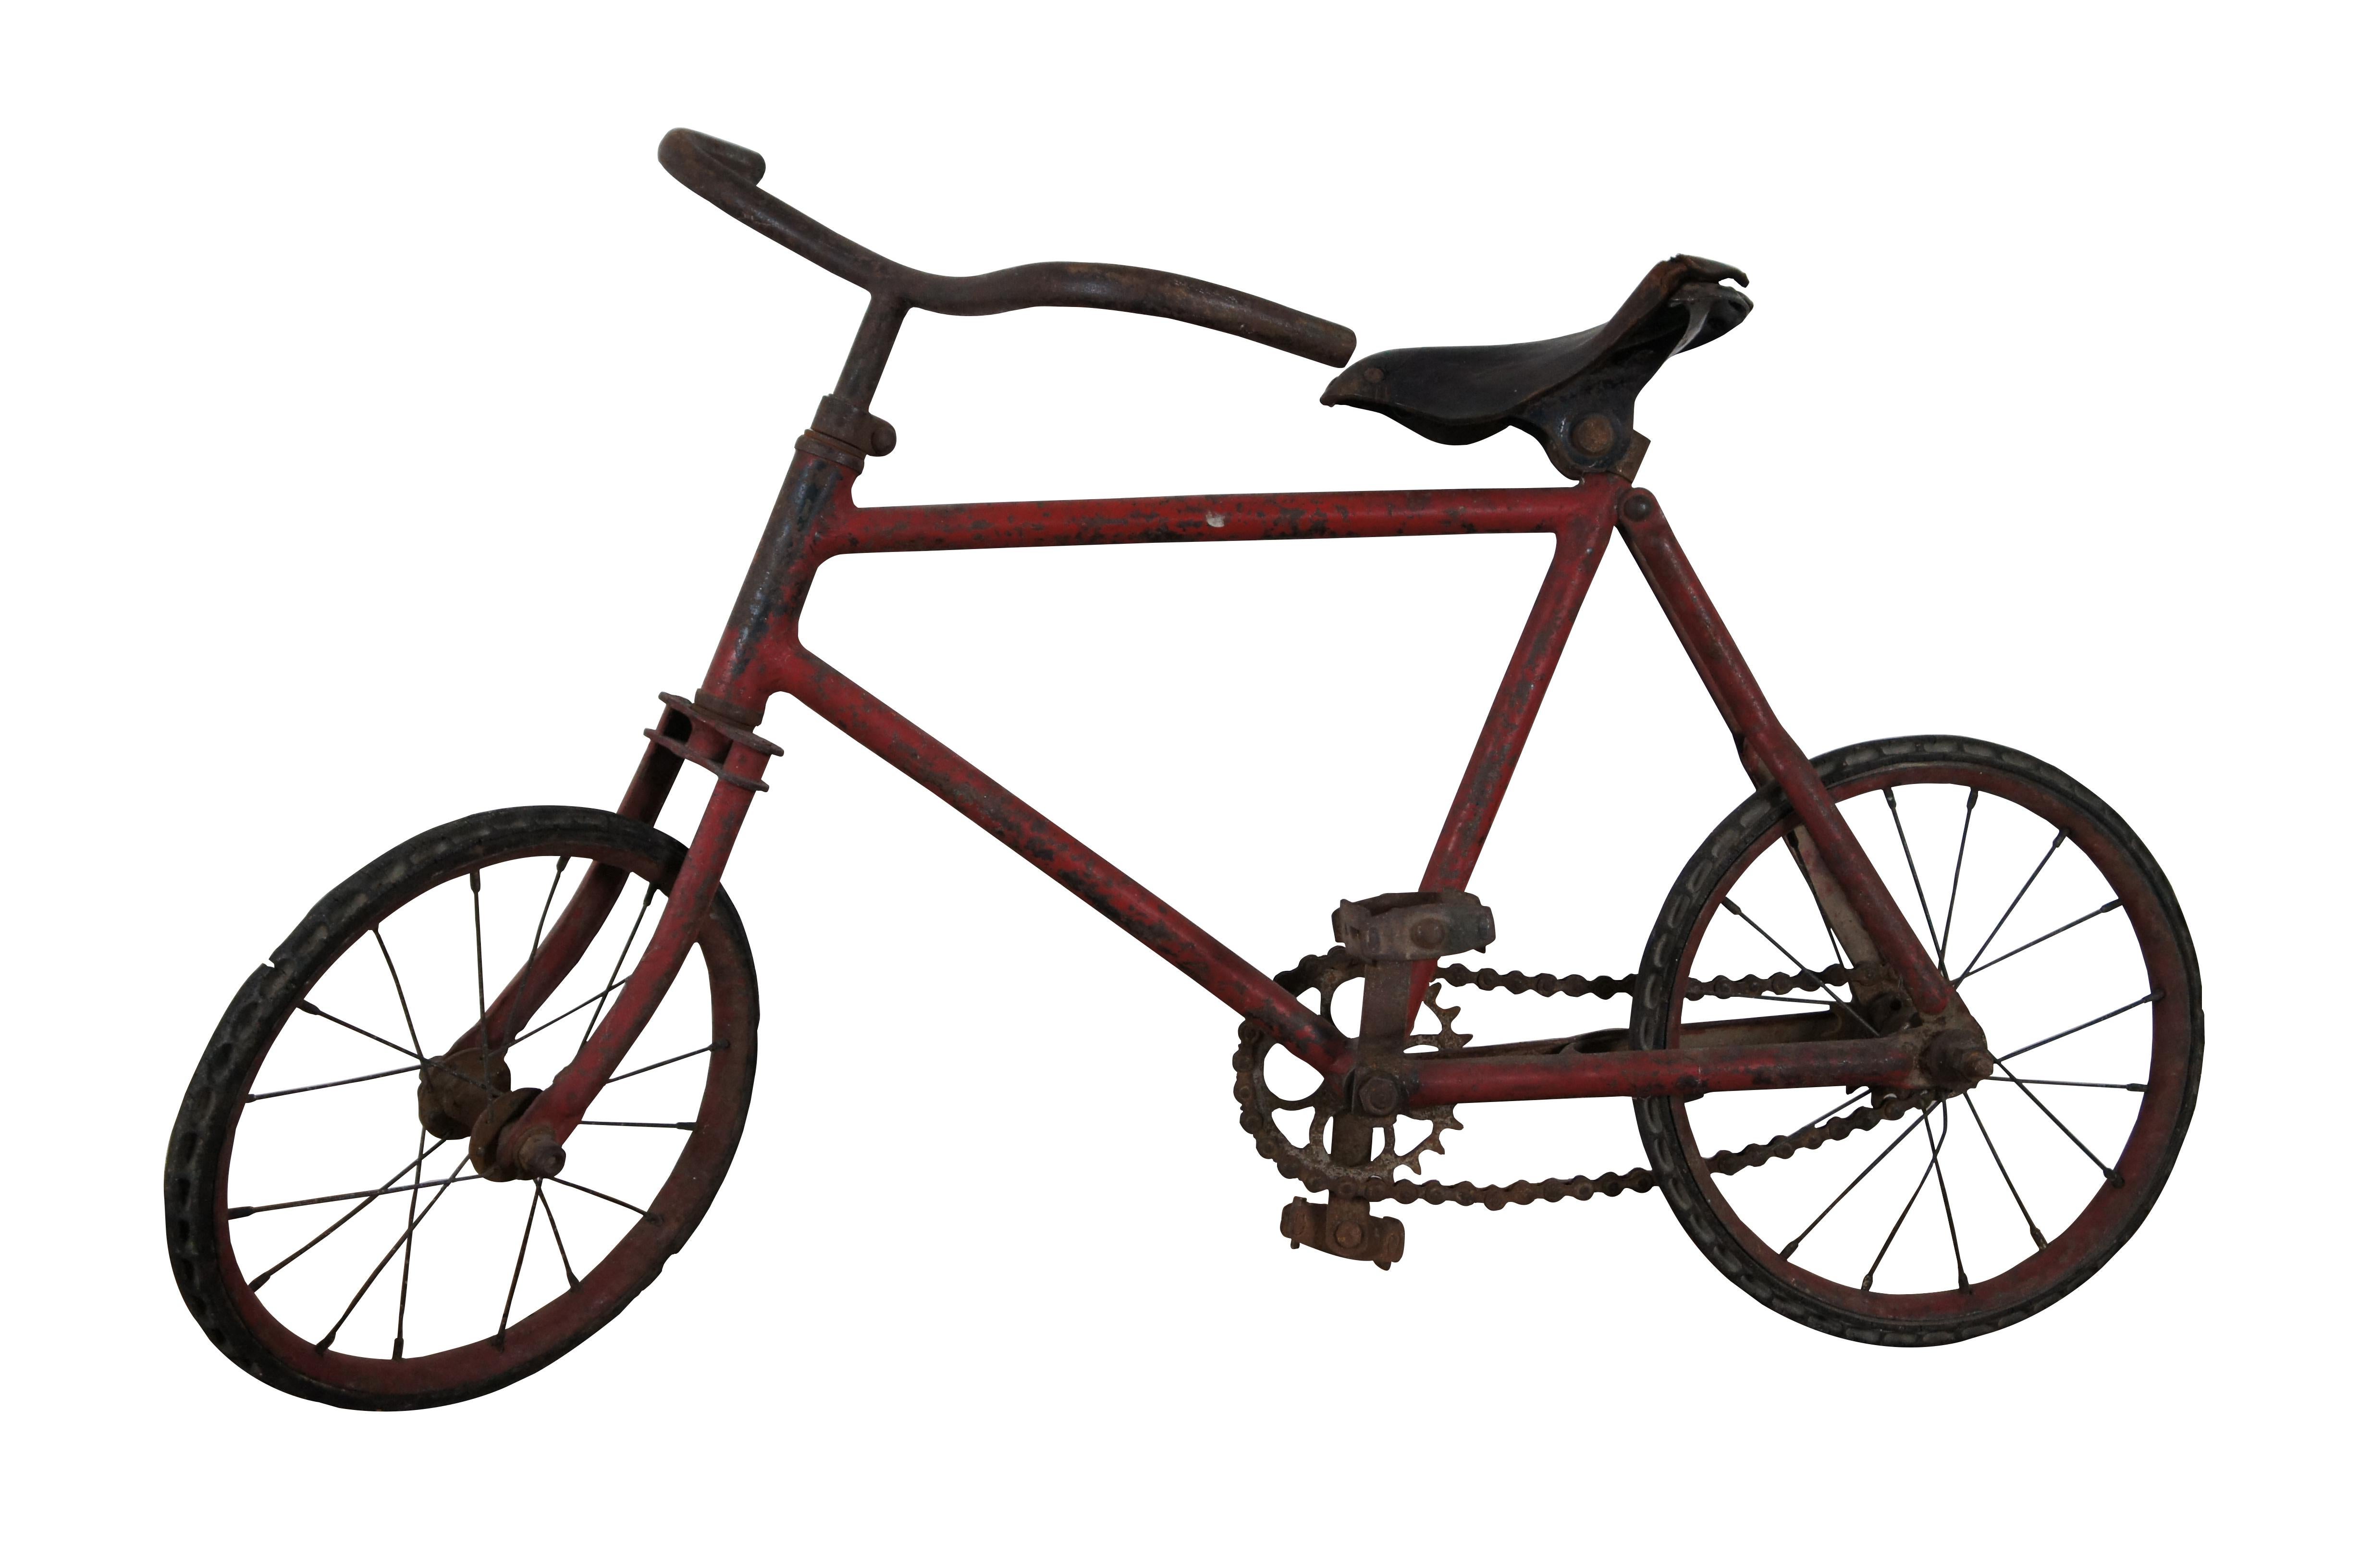 Antique early 20th century French child’s bicycle, crafted of red painted metal with hard rubber tires and leather covered seat. Measure: 32